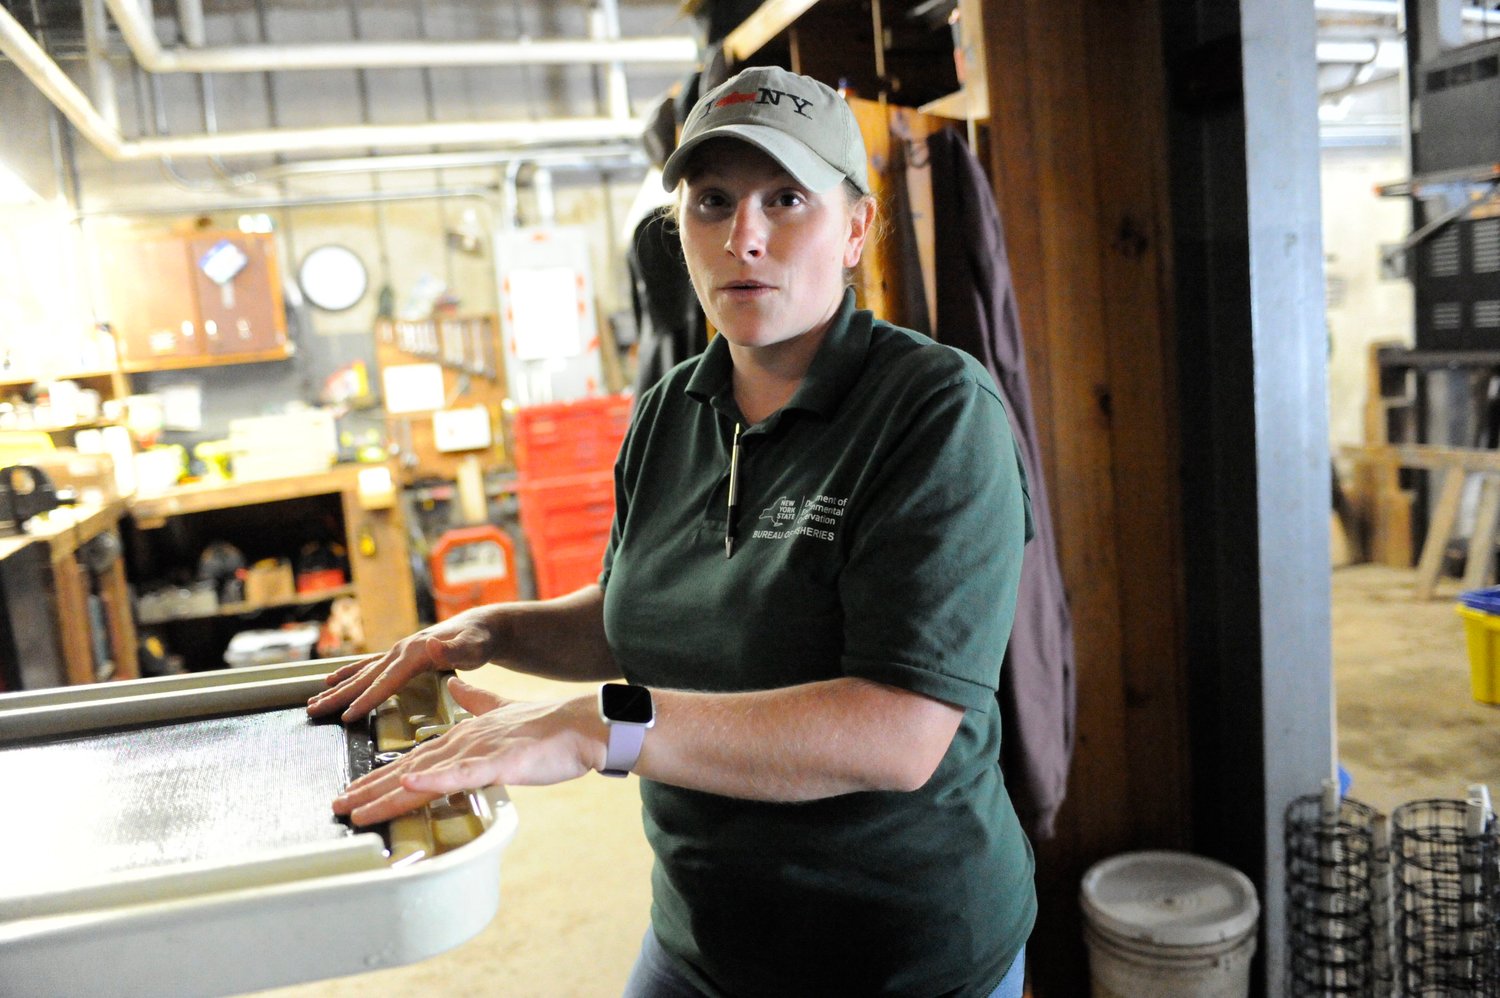 Michelle Poprawski, a  NYS DEC fish culturist, is the first woman to serve as manager of the Catskill Fish Hatchery. She is pictured explaining that after the fertilization process is complete, and after other steps, the eggs are placed into incubation trays.